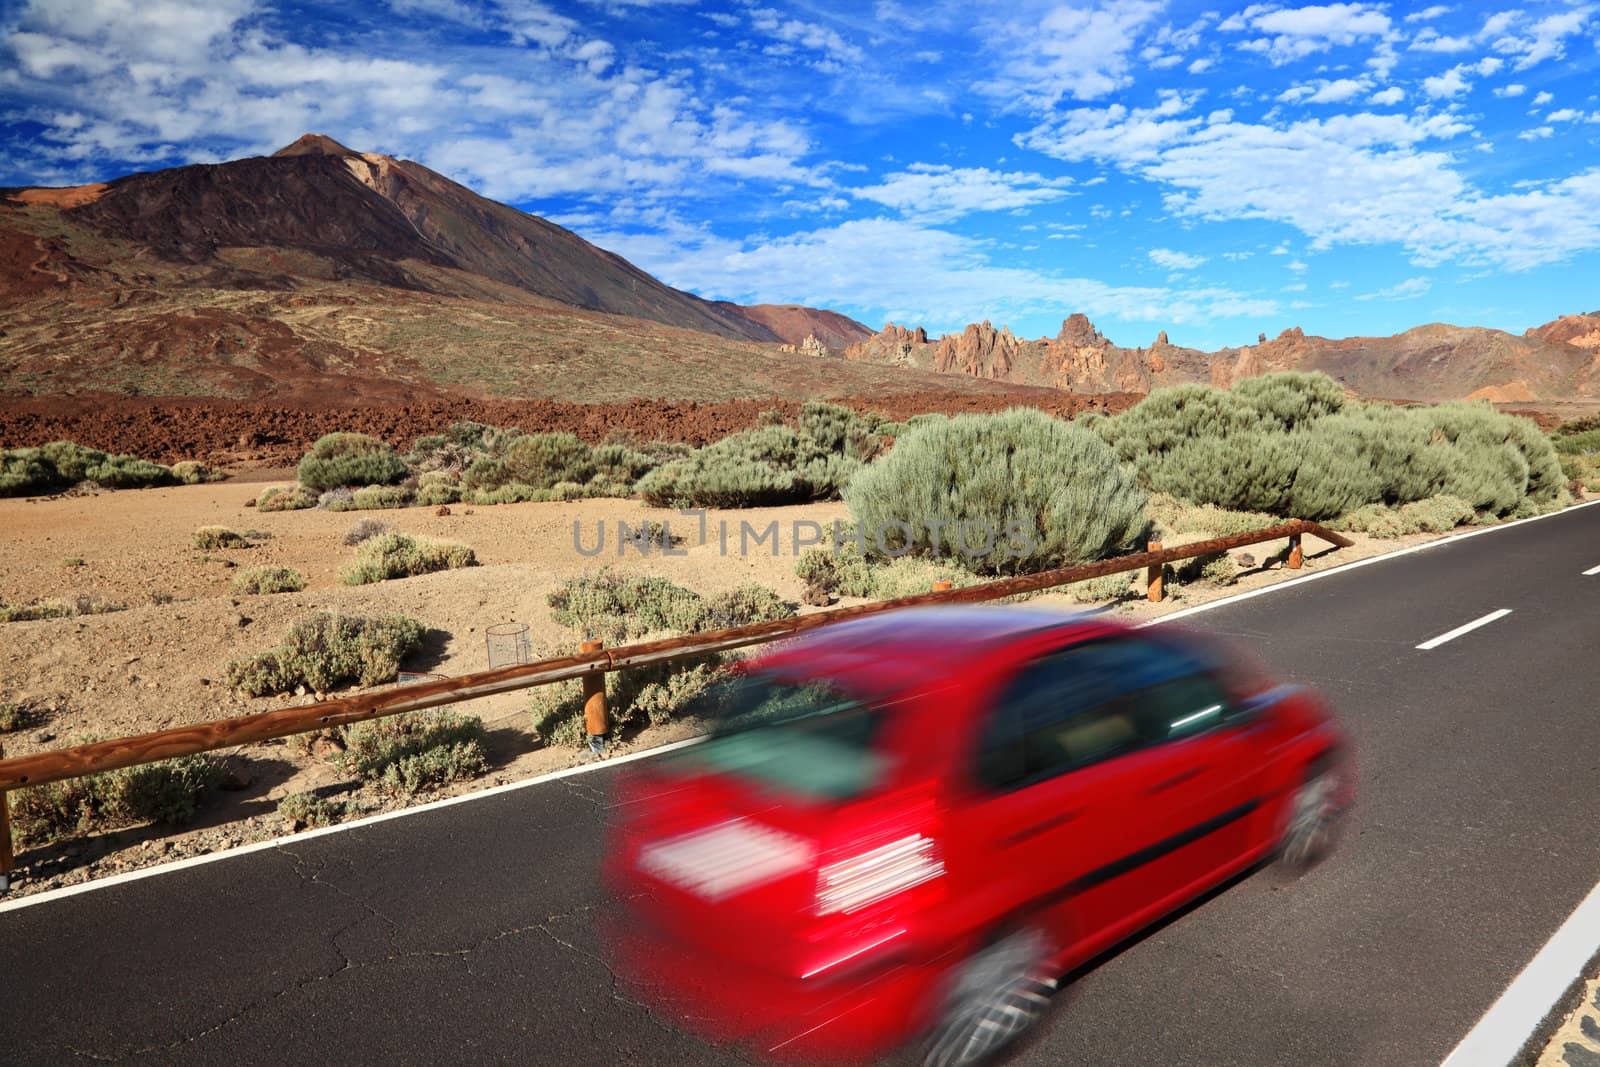 Car in beautiful landscape. Red car road trip image from Tenerife, Canary Islands. Volcano Teide in the background.